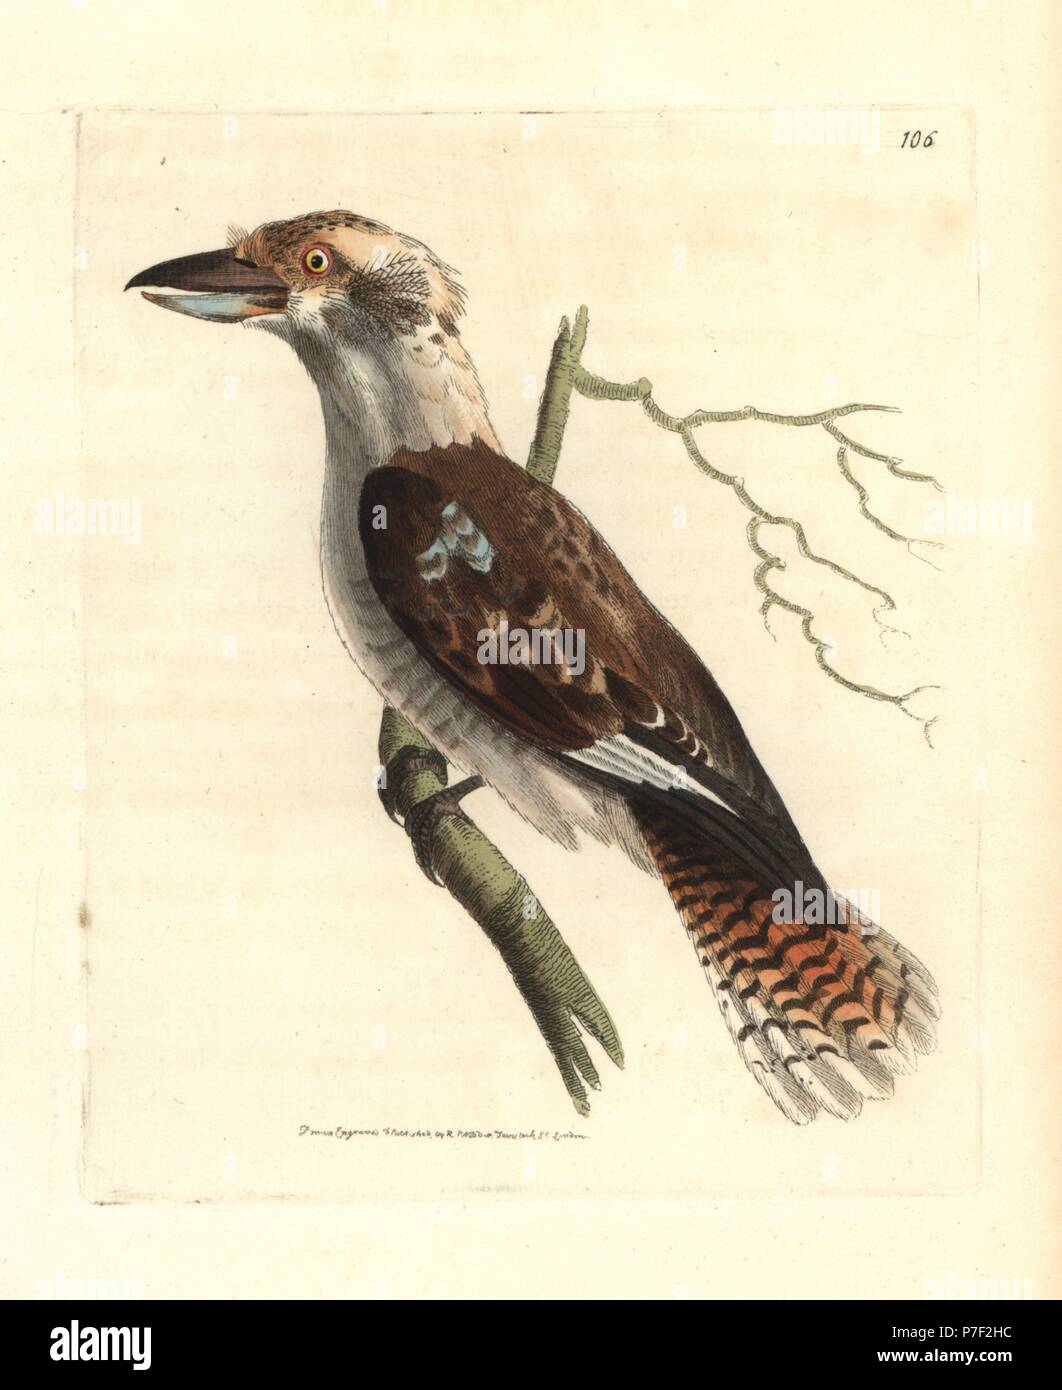 Laughing kookaburra, Dacelo novaeguineae (Gigantic dacelo, Dacelo gigantea). Handcoloured copperplate engraving drawn and engraved by Richard Polydore Nodder from William Elford Leach's Zoological Miscellany, McMillan, London, 1815. Stock Photo